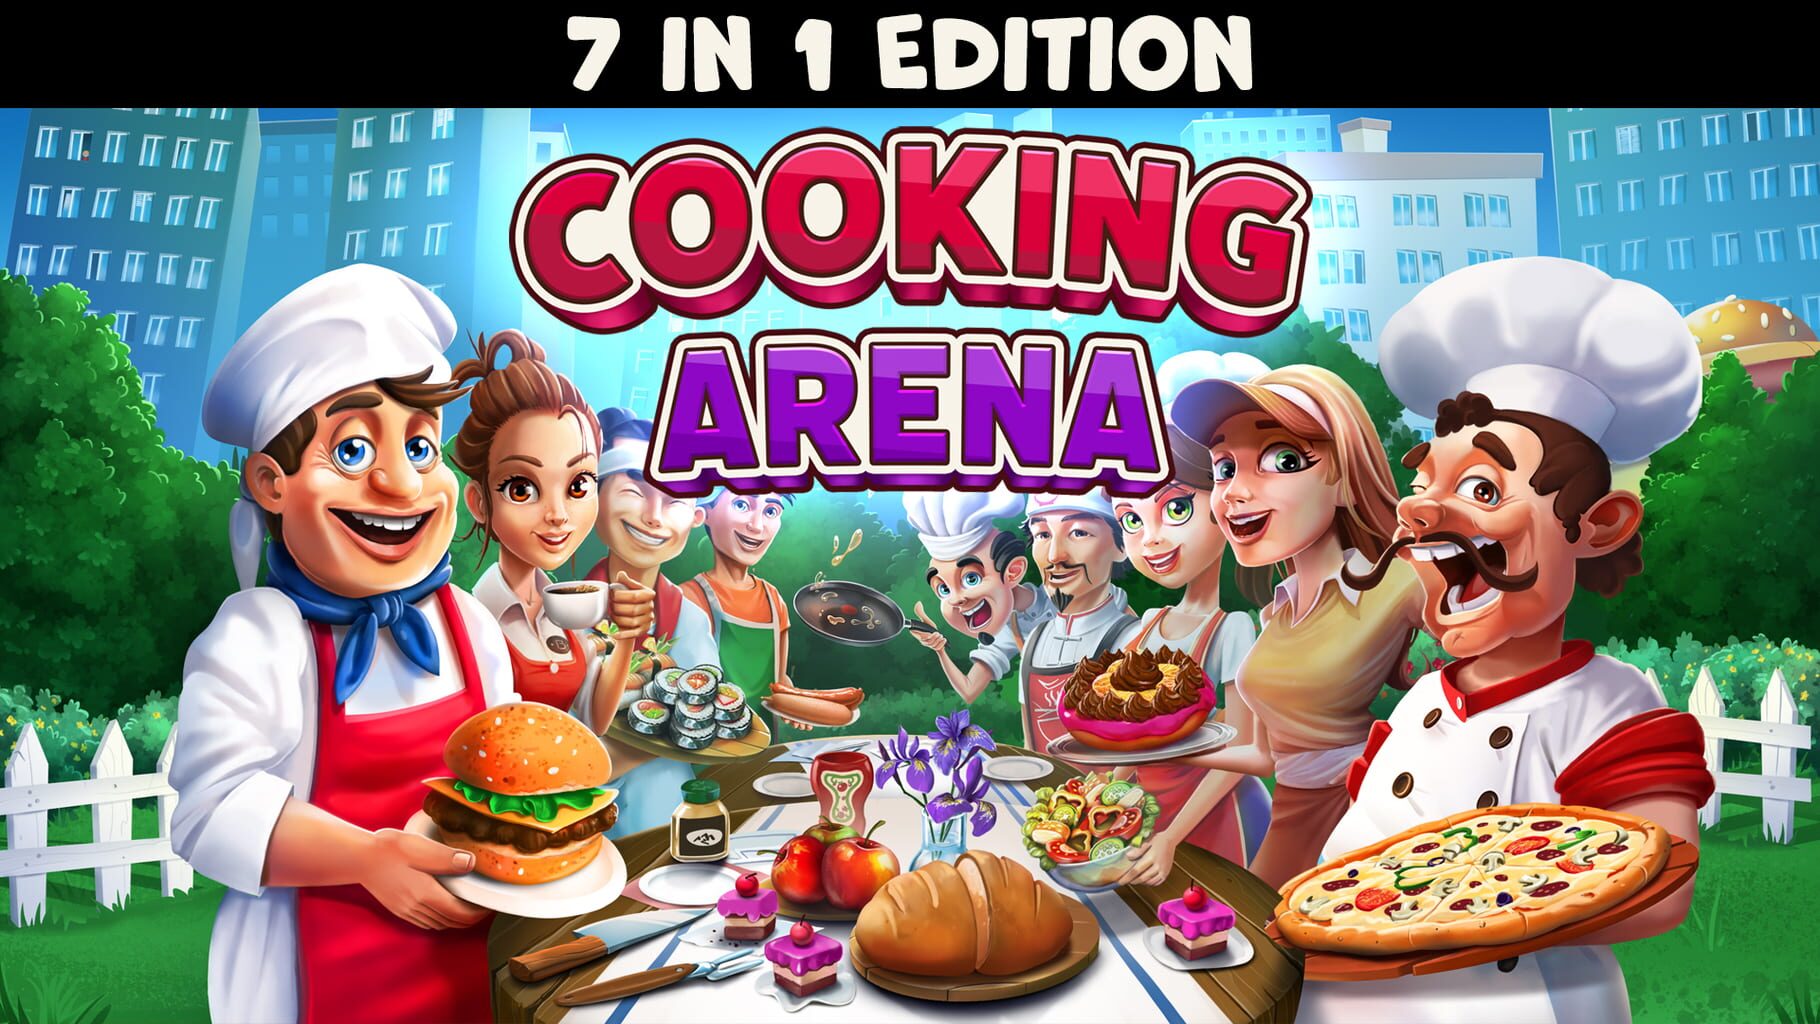 Cooking Arena: 7 in 1 Edition artwork